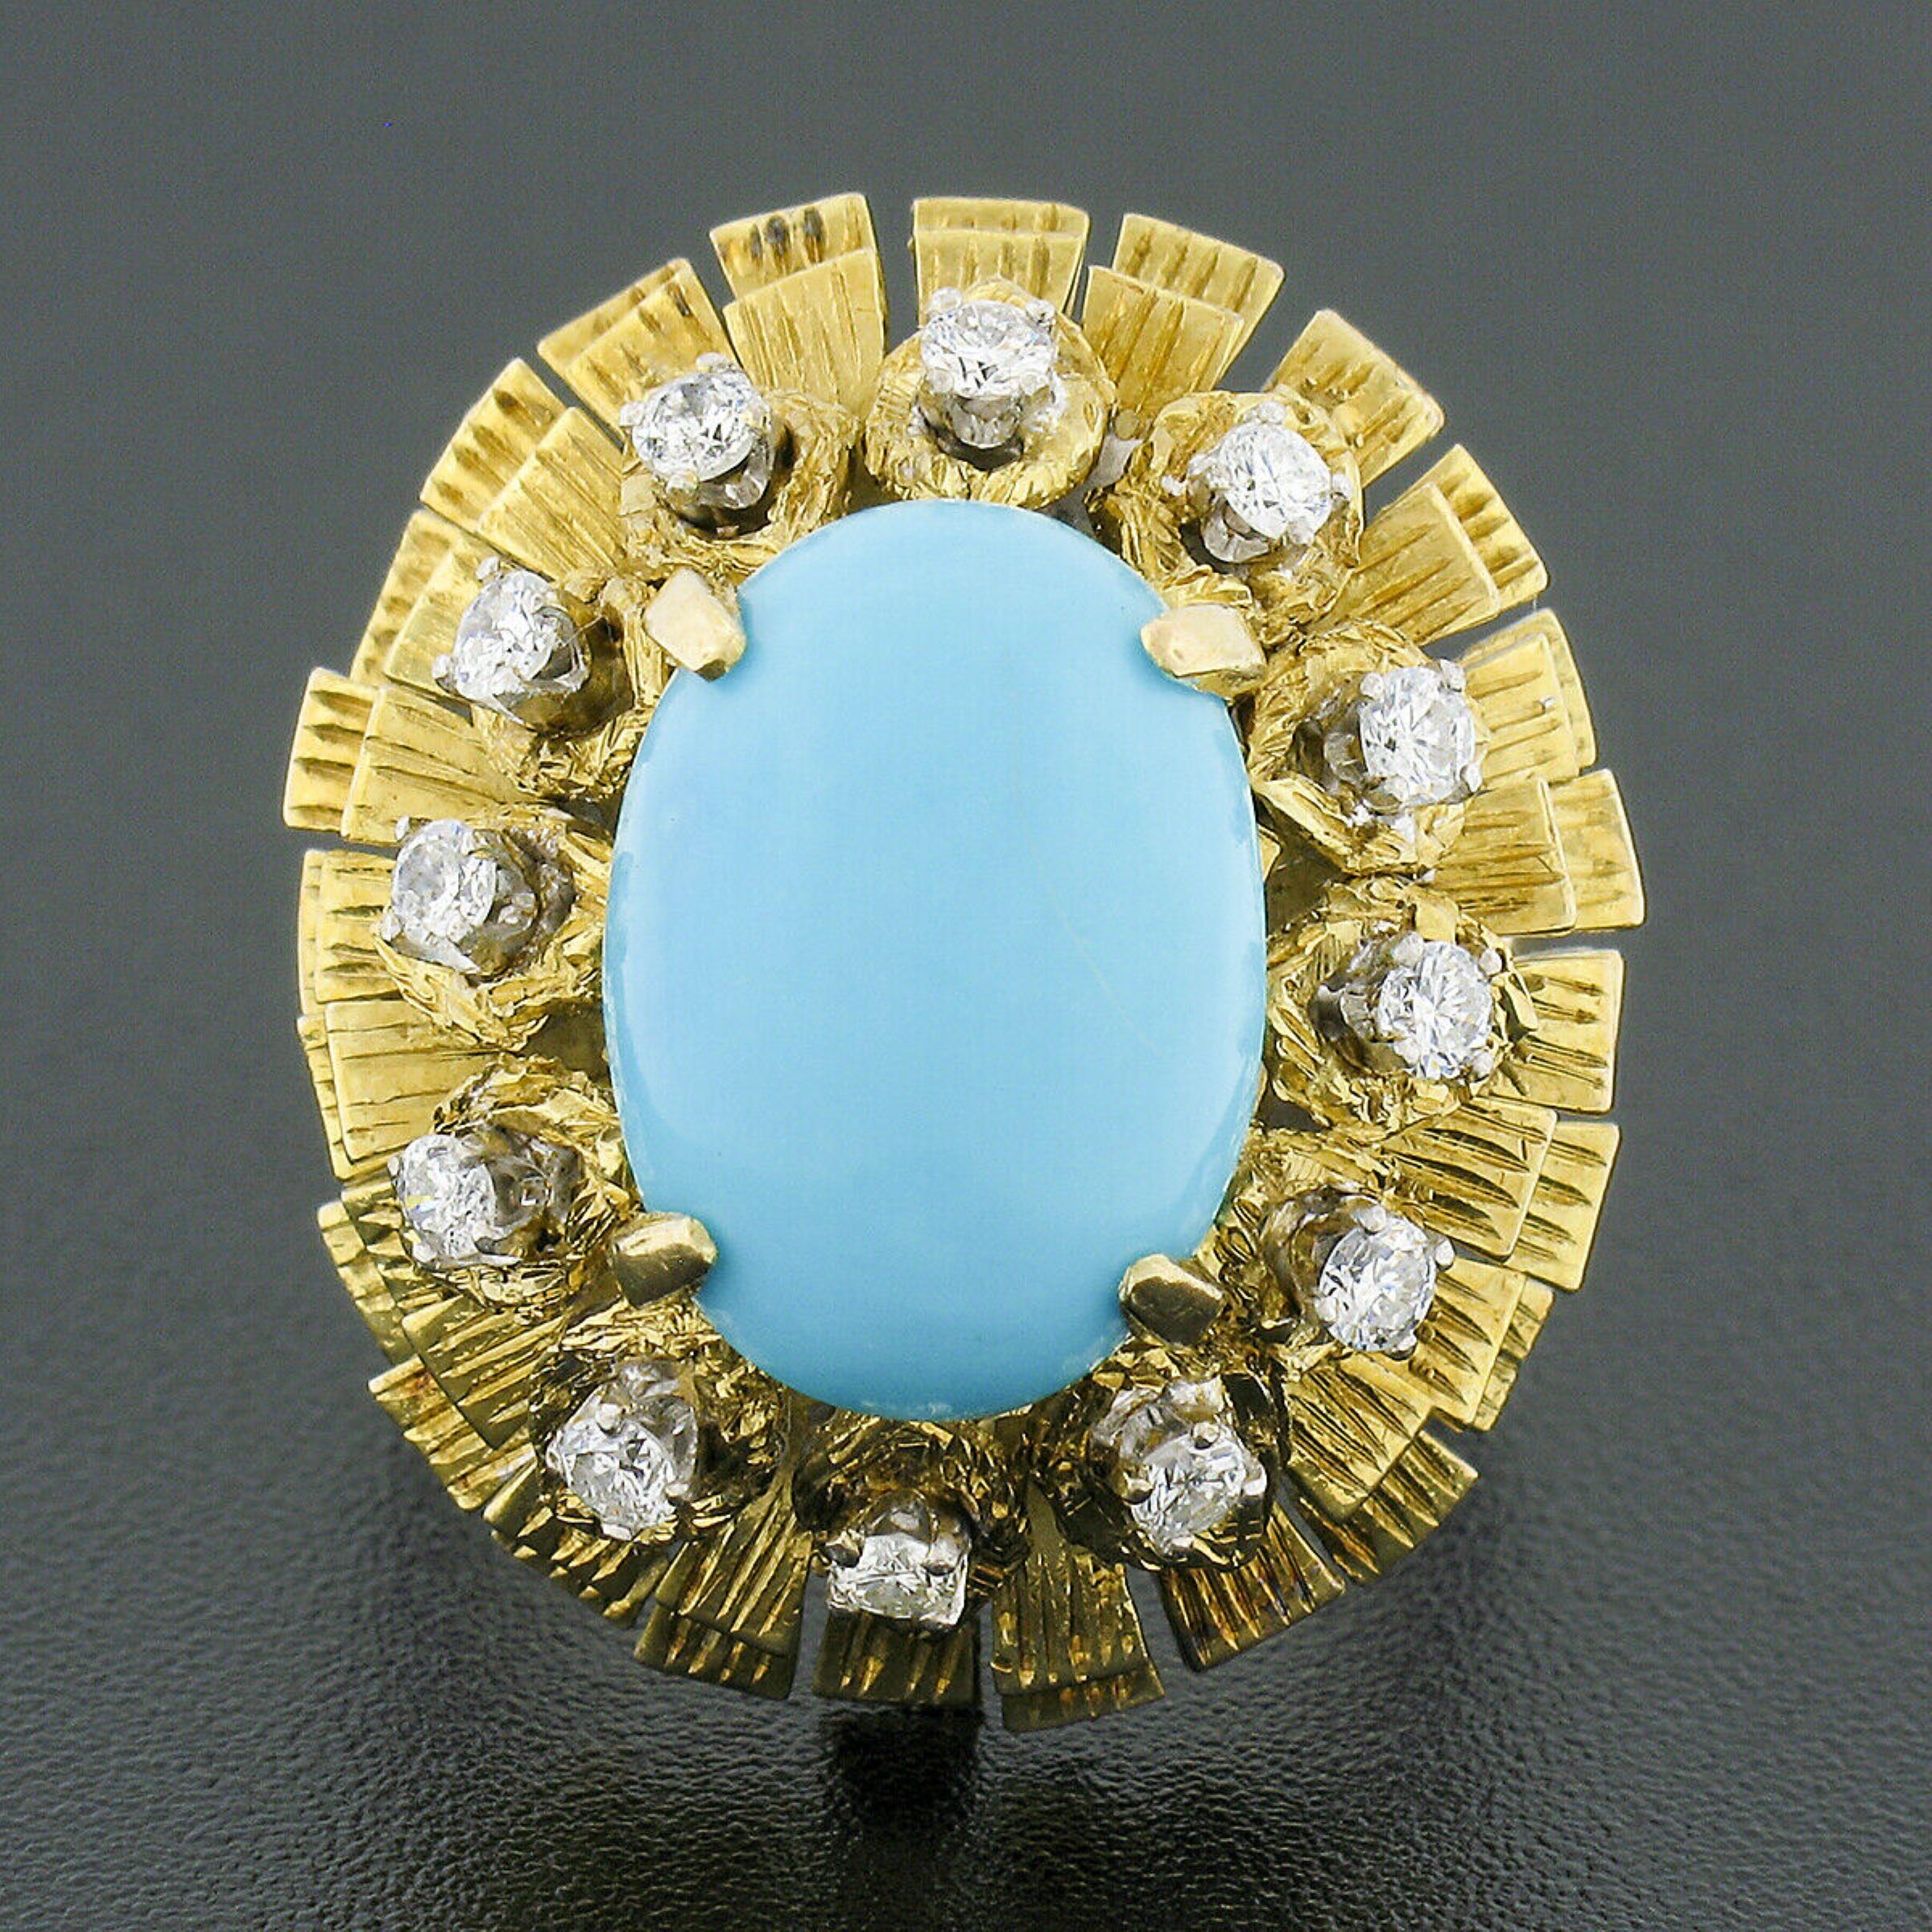 You are looking at a beautiful vintage ring that was crafted from solid 14k yellow gold featuring a genuine turquoise solitaire neatly set at the top of an elegantly layered and textured finish design. The very fine oval cabochon cut turquoise has a